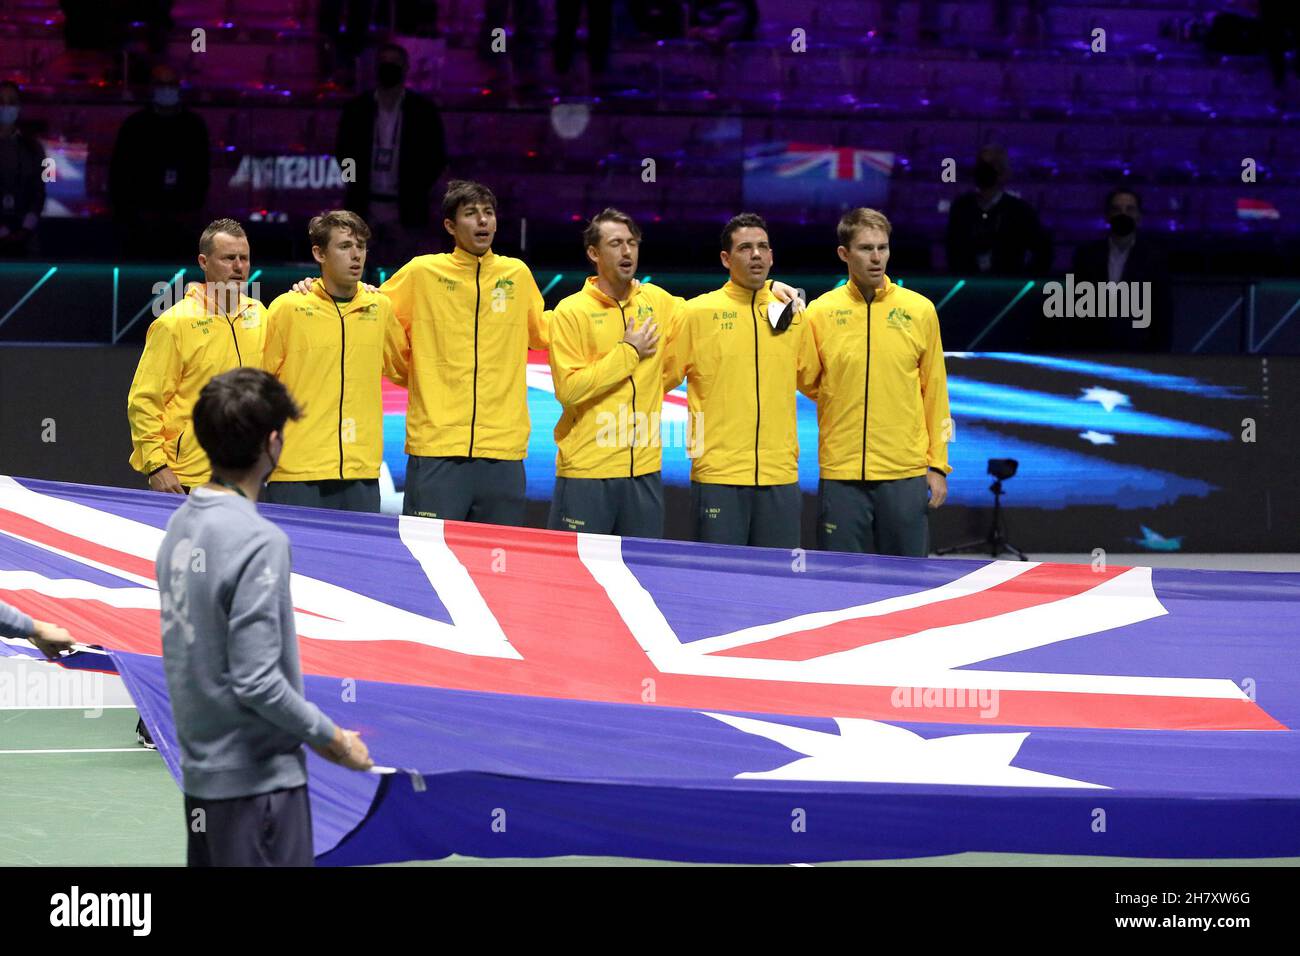 Turin, Italy. 25th Nov, 2021. The team of Australia at the begin of the match during Davis Cup Finals 2021, Tennis Internationals in Turin, Italy, November 25 2021 Credit: Independent Photo Agency/Alamy Live News Stock Photo